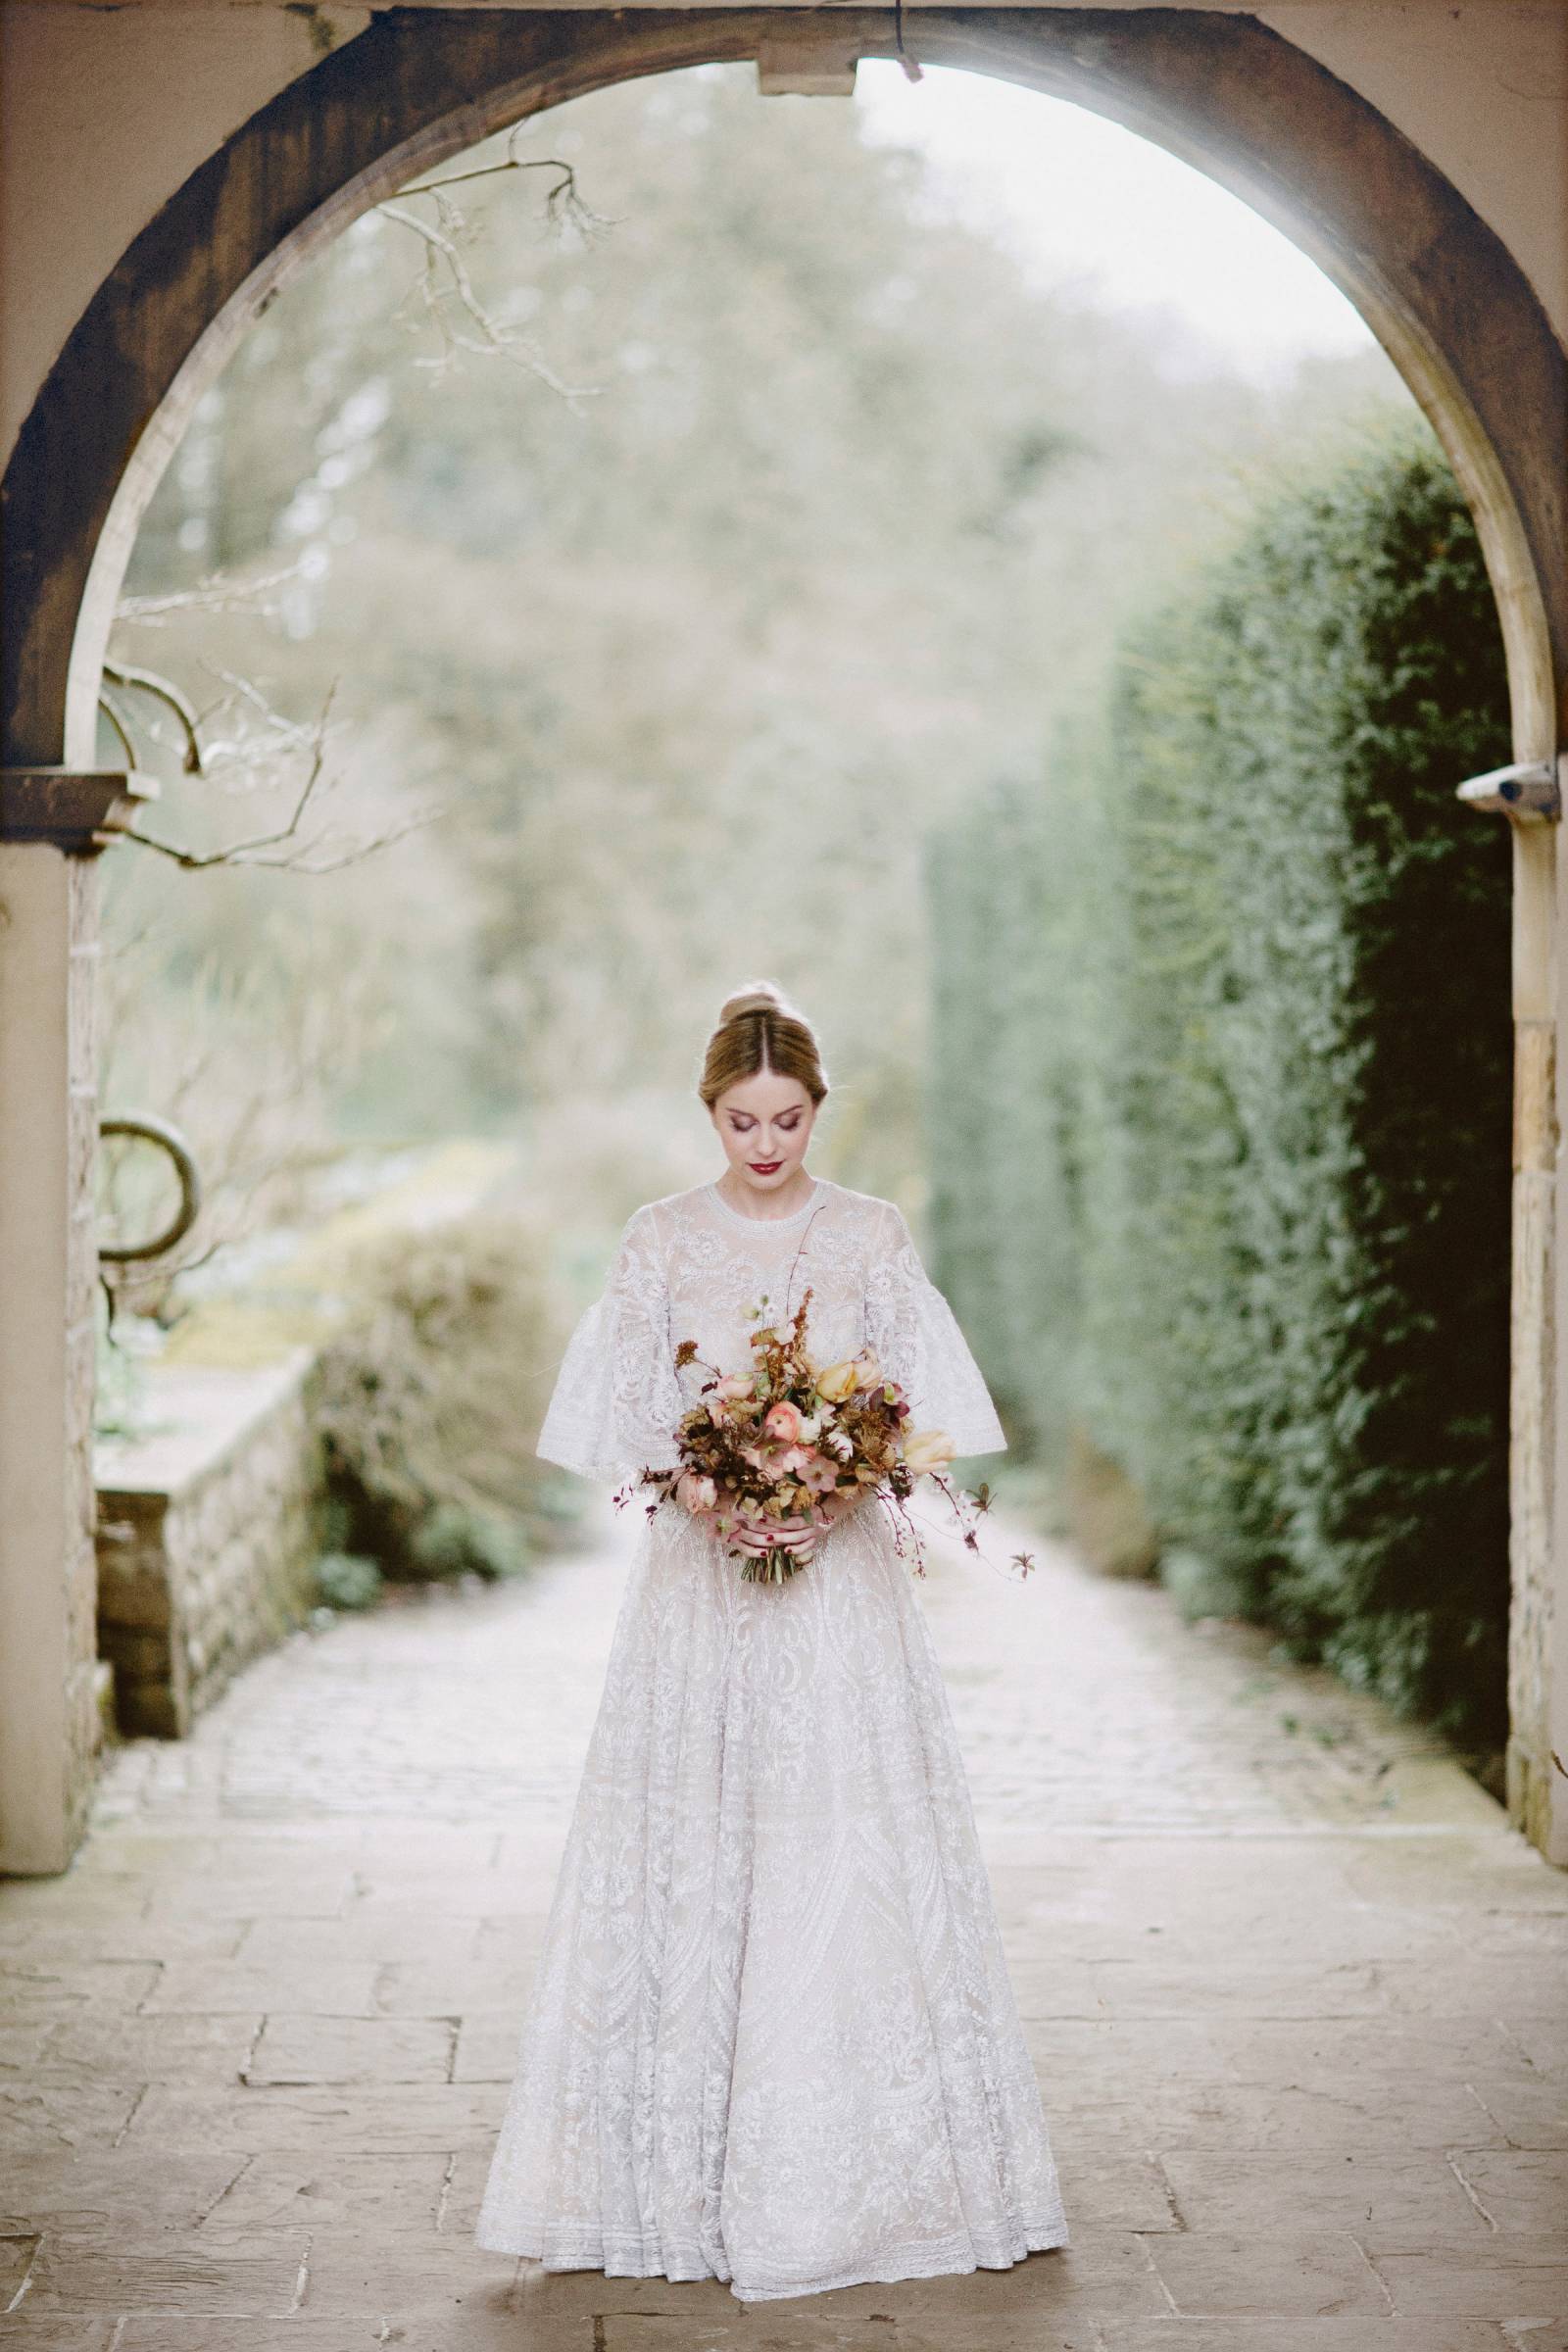 Wedding inspiration with a sense of history and faded grandeur ...